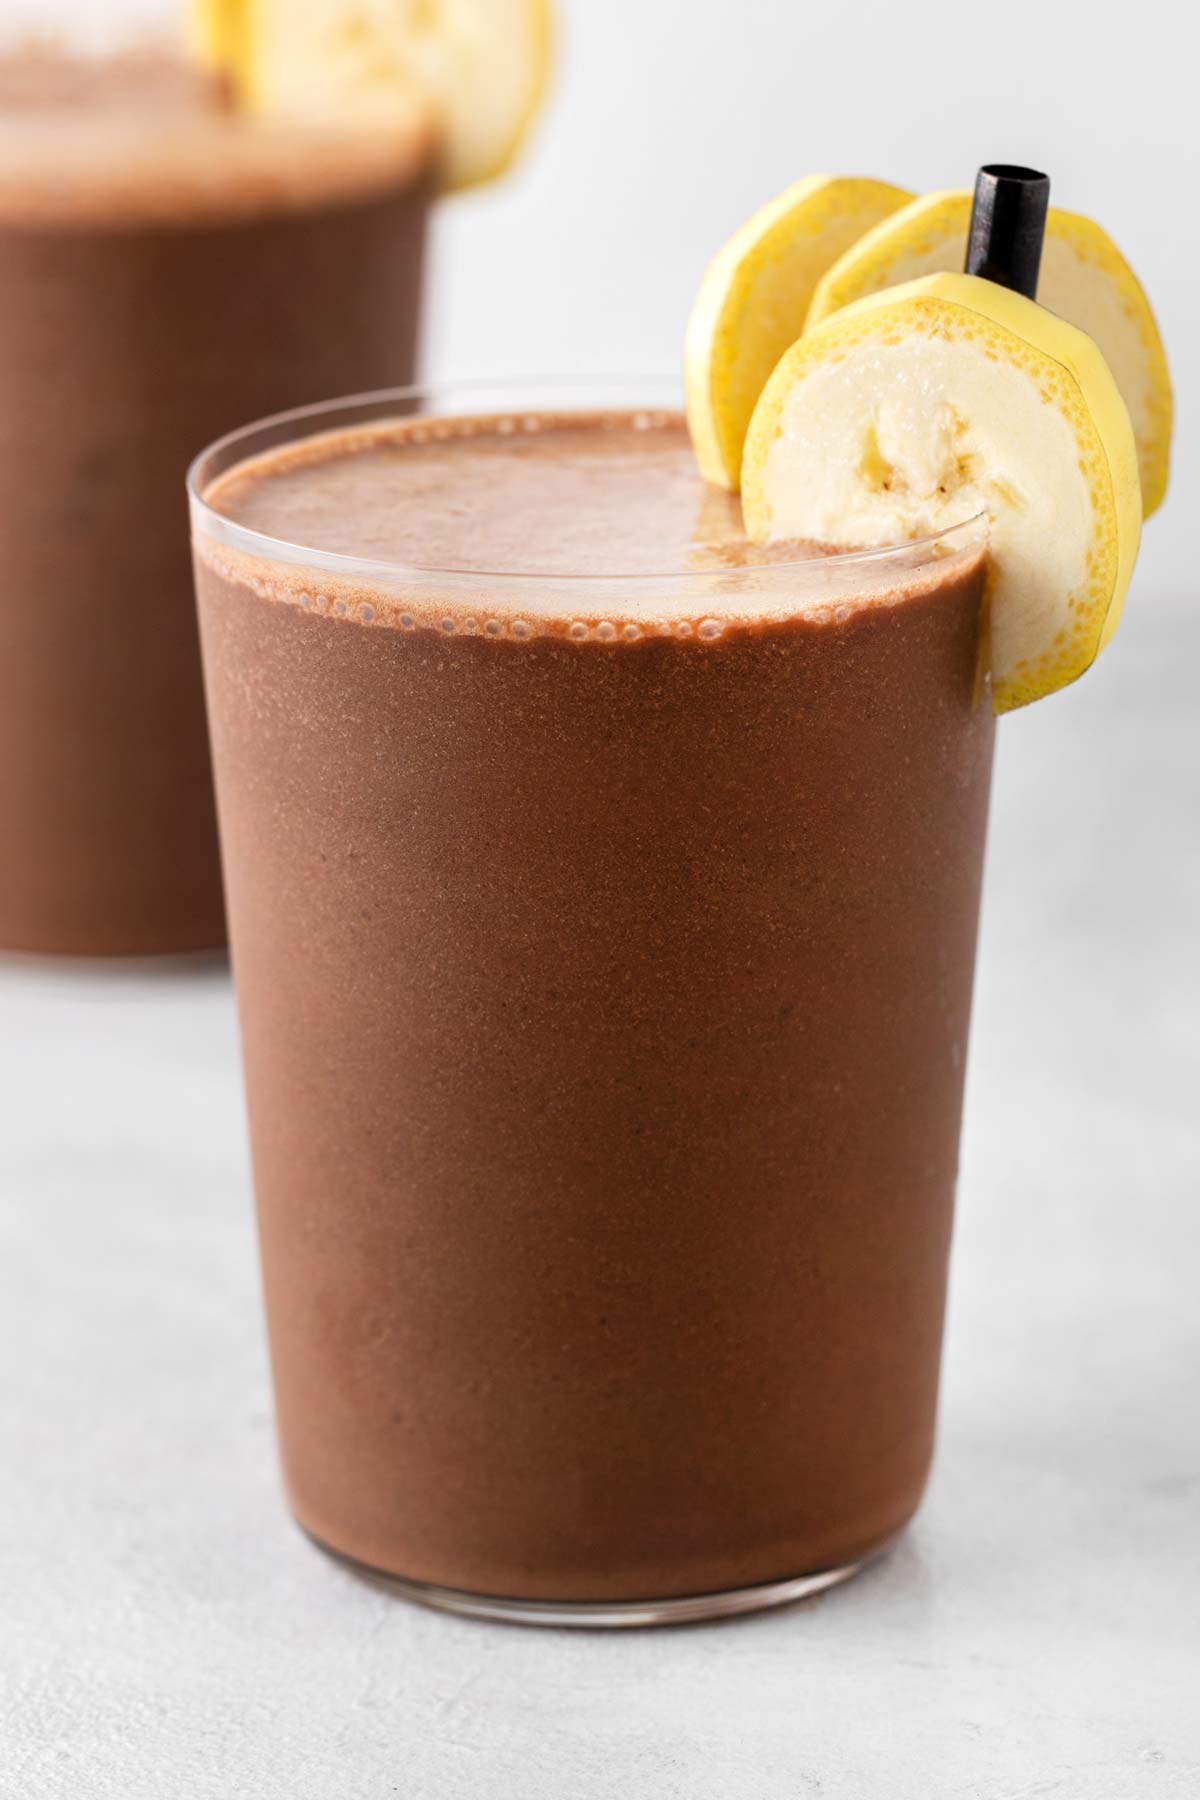 Mocha smoothie in a glass.